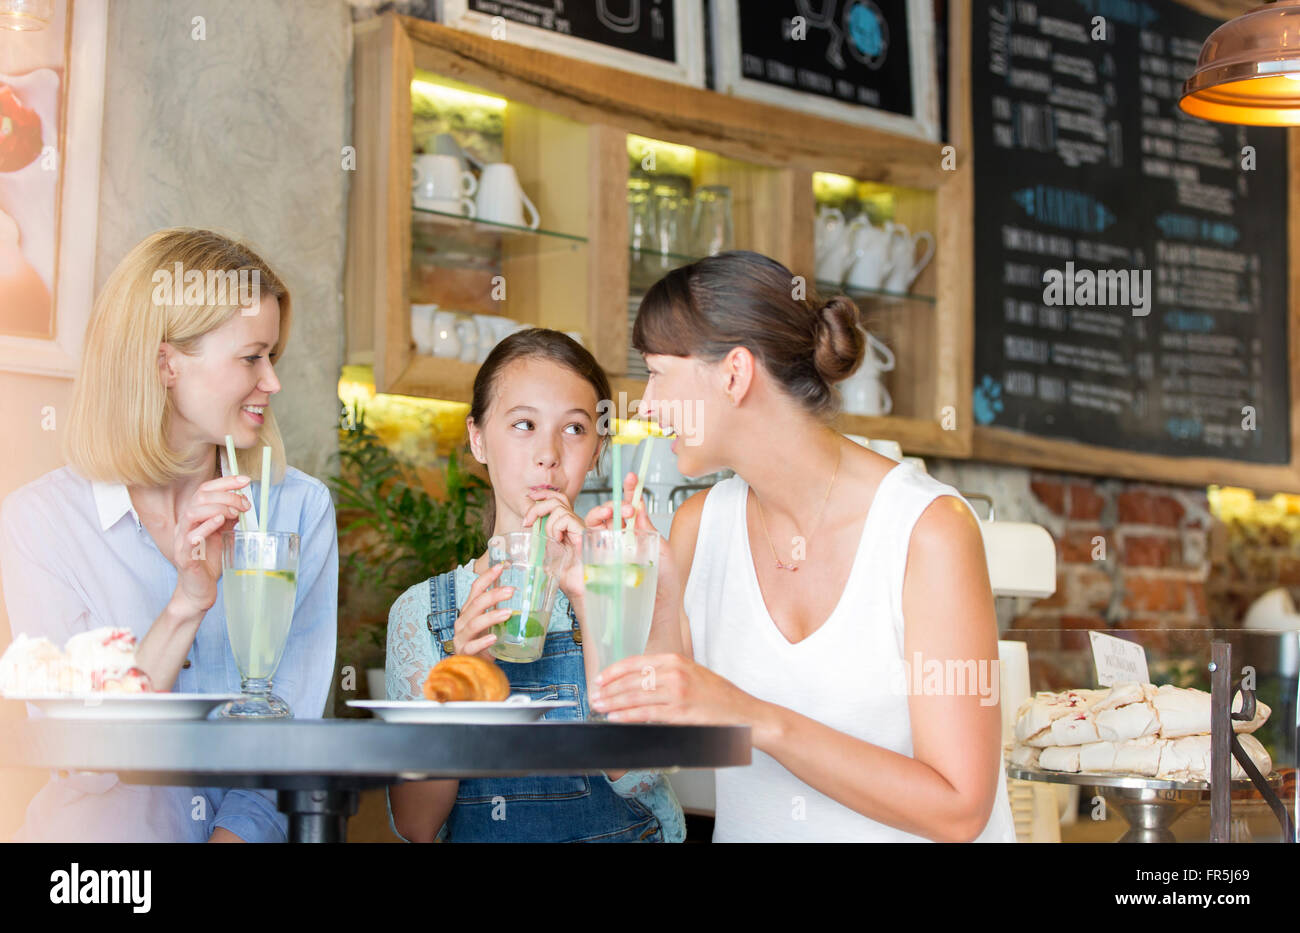 Mother and daughter drinking lemonade at cafe table Stock Photo